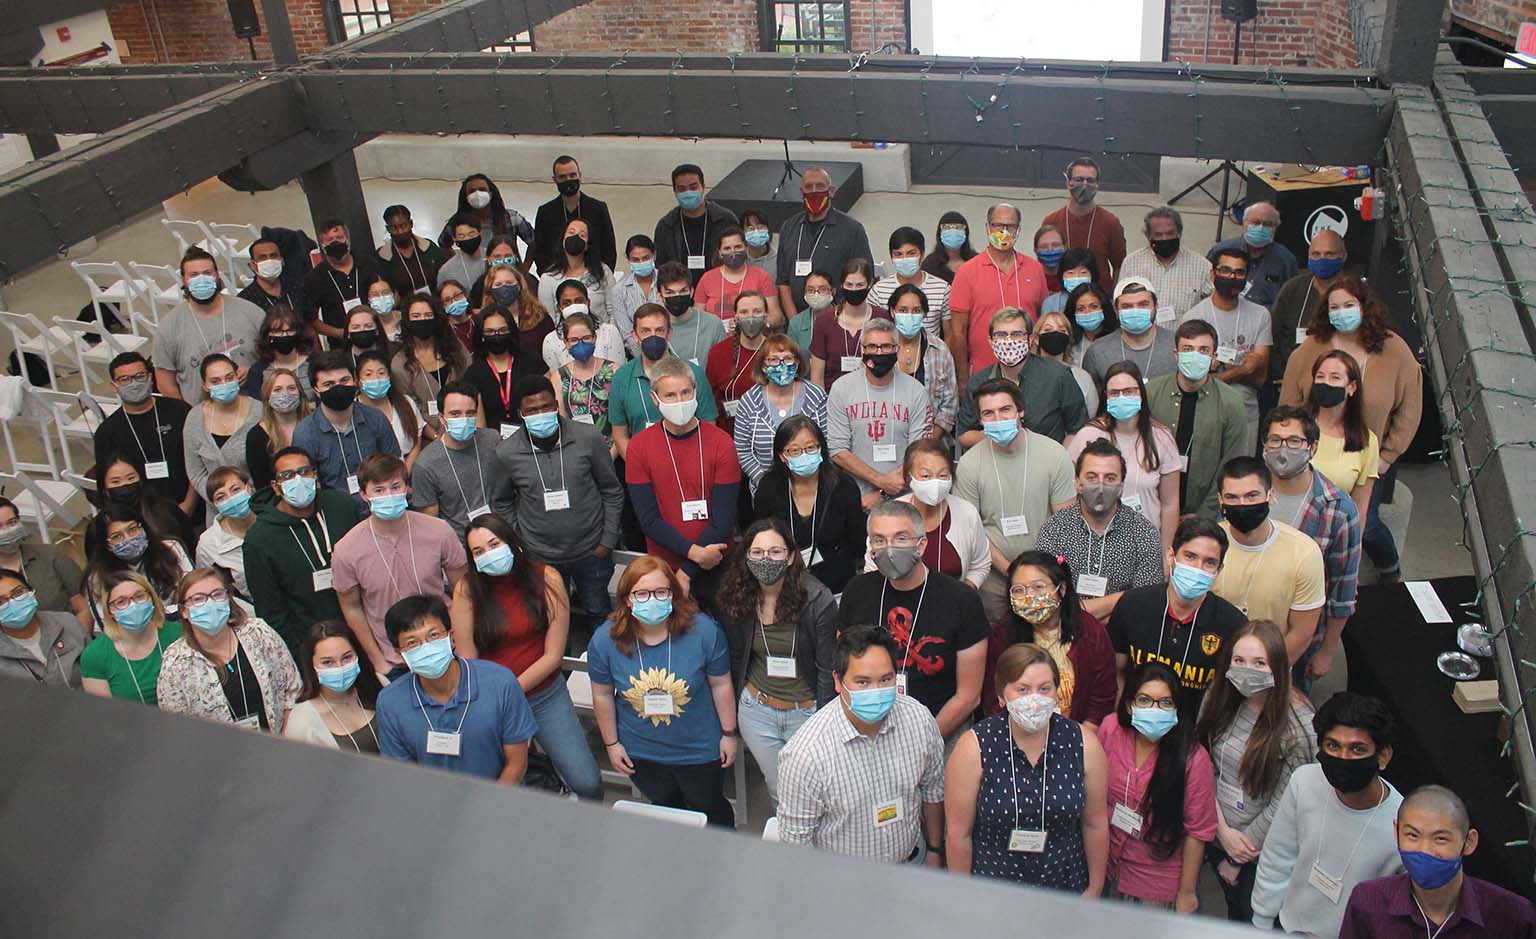 Participants at the 2021 Microbiology Retreat gather for a group photo in an open area of a red-brick building.  All are wearing face masks because of the COVID-19 pandemic.